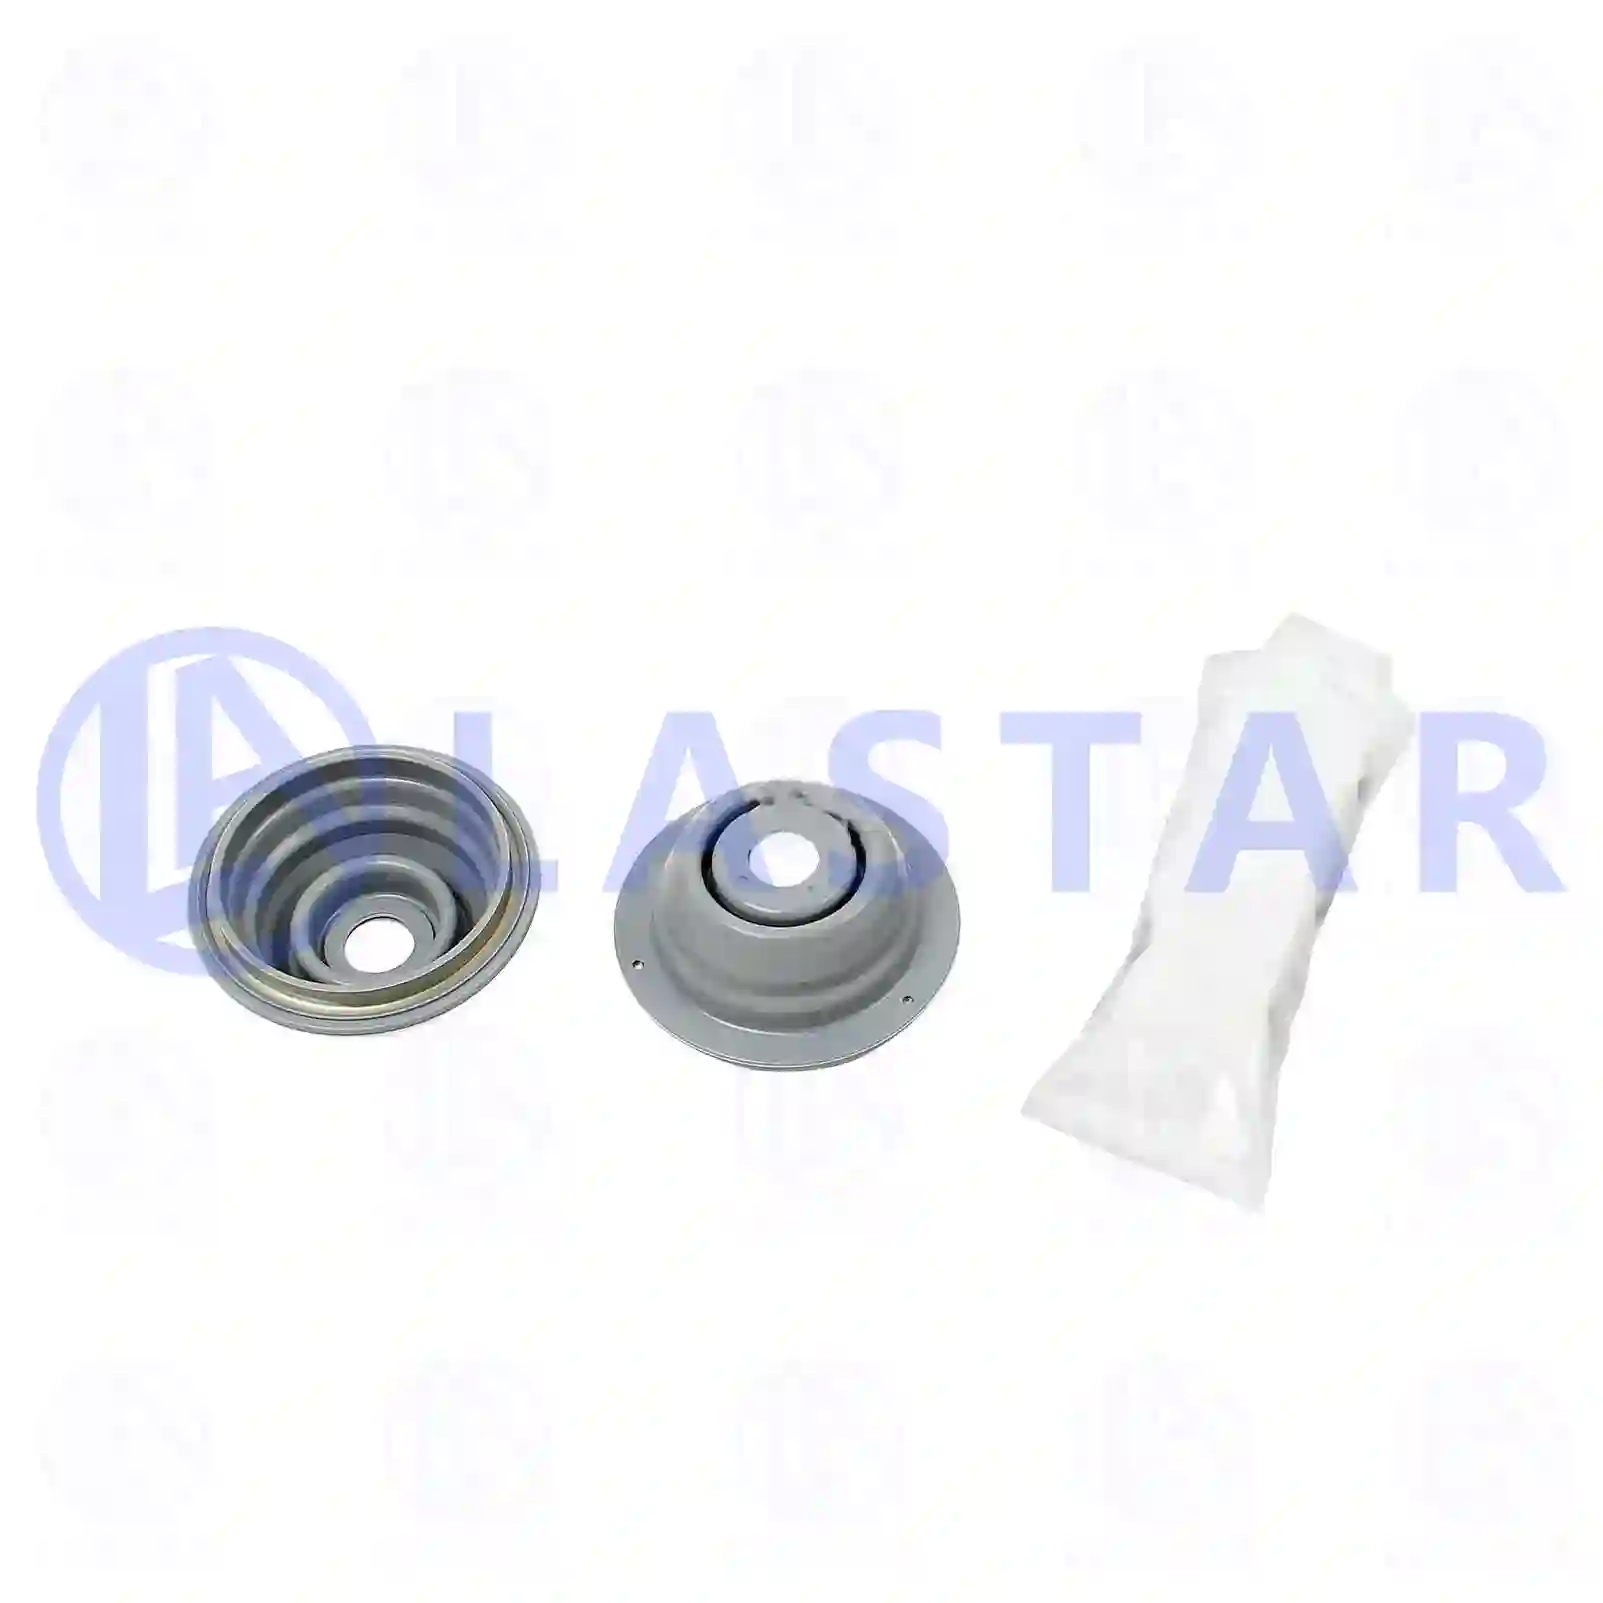 Boot, 77714083, 81501026001, 0004 ||  77714083 Lastar Spare Part | Truck Spare Parts, Auotomotive Spare Parts Boot, 77714083, 81501026001, 0004 ||  77714083 Lastar Spare Part | Truck Spare Parts, Auotomotive Spare Parts